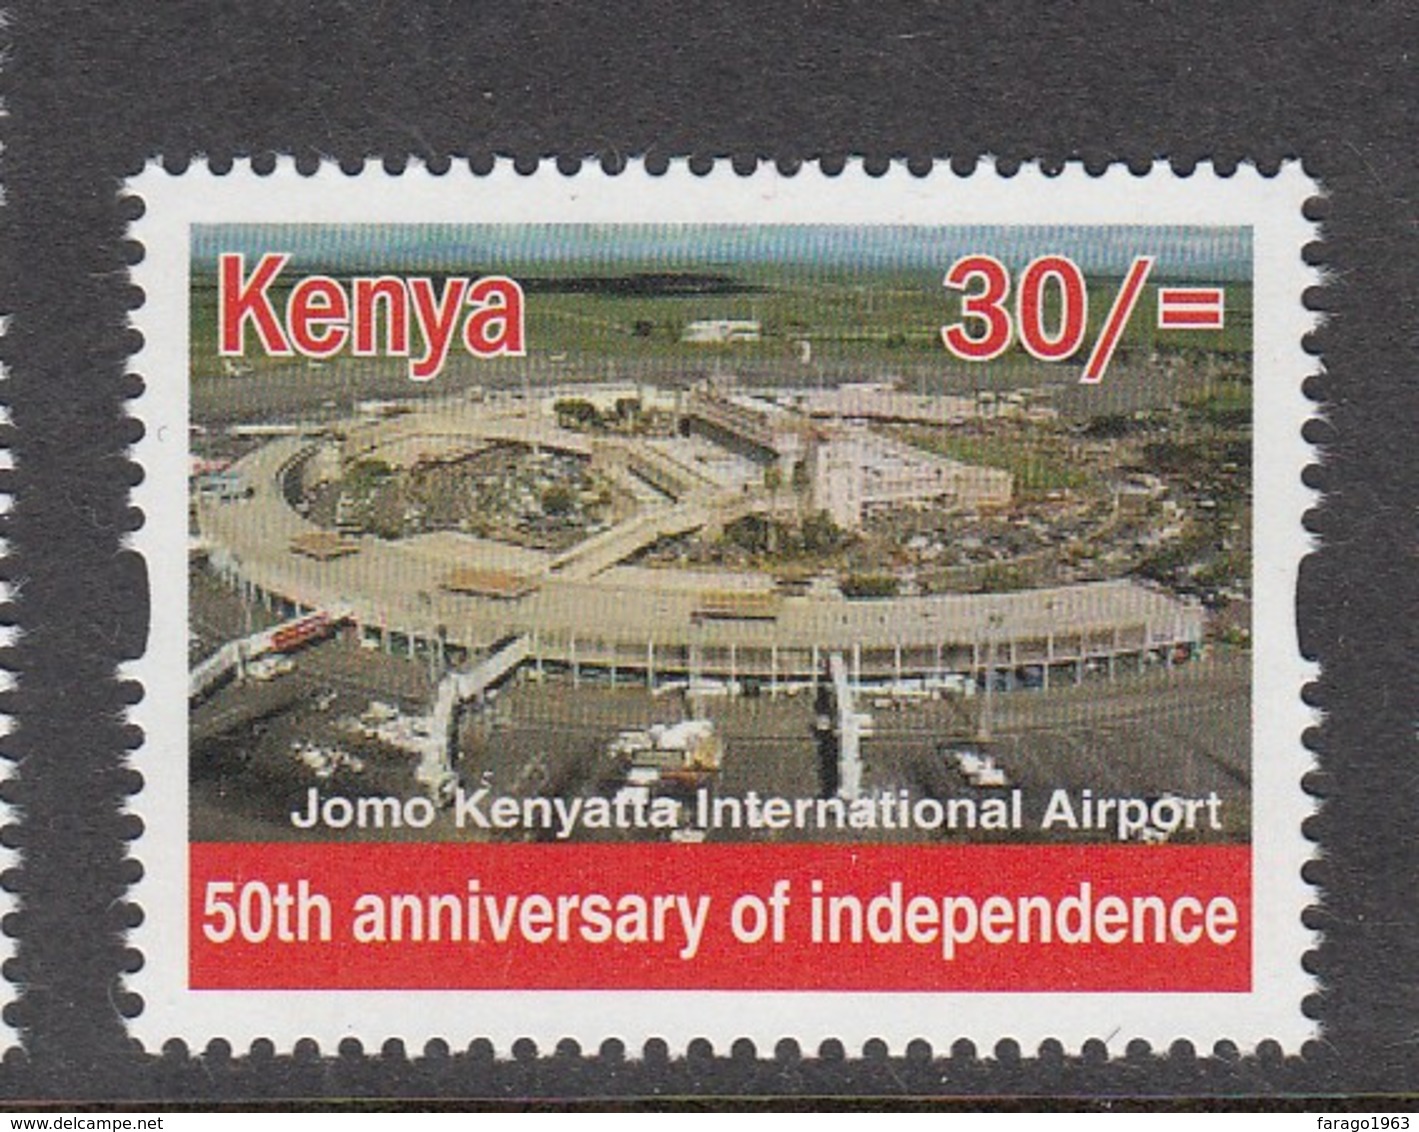 Kenya 2013 30/- JKIA Airport - Taken Out Of Sheet Of 25 Different Stamps - Cheaper Than Buying Sheet!! - Autres (Air)